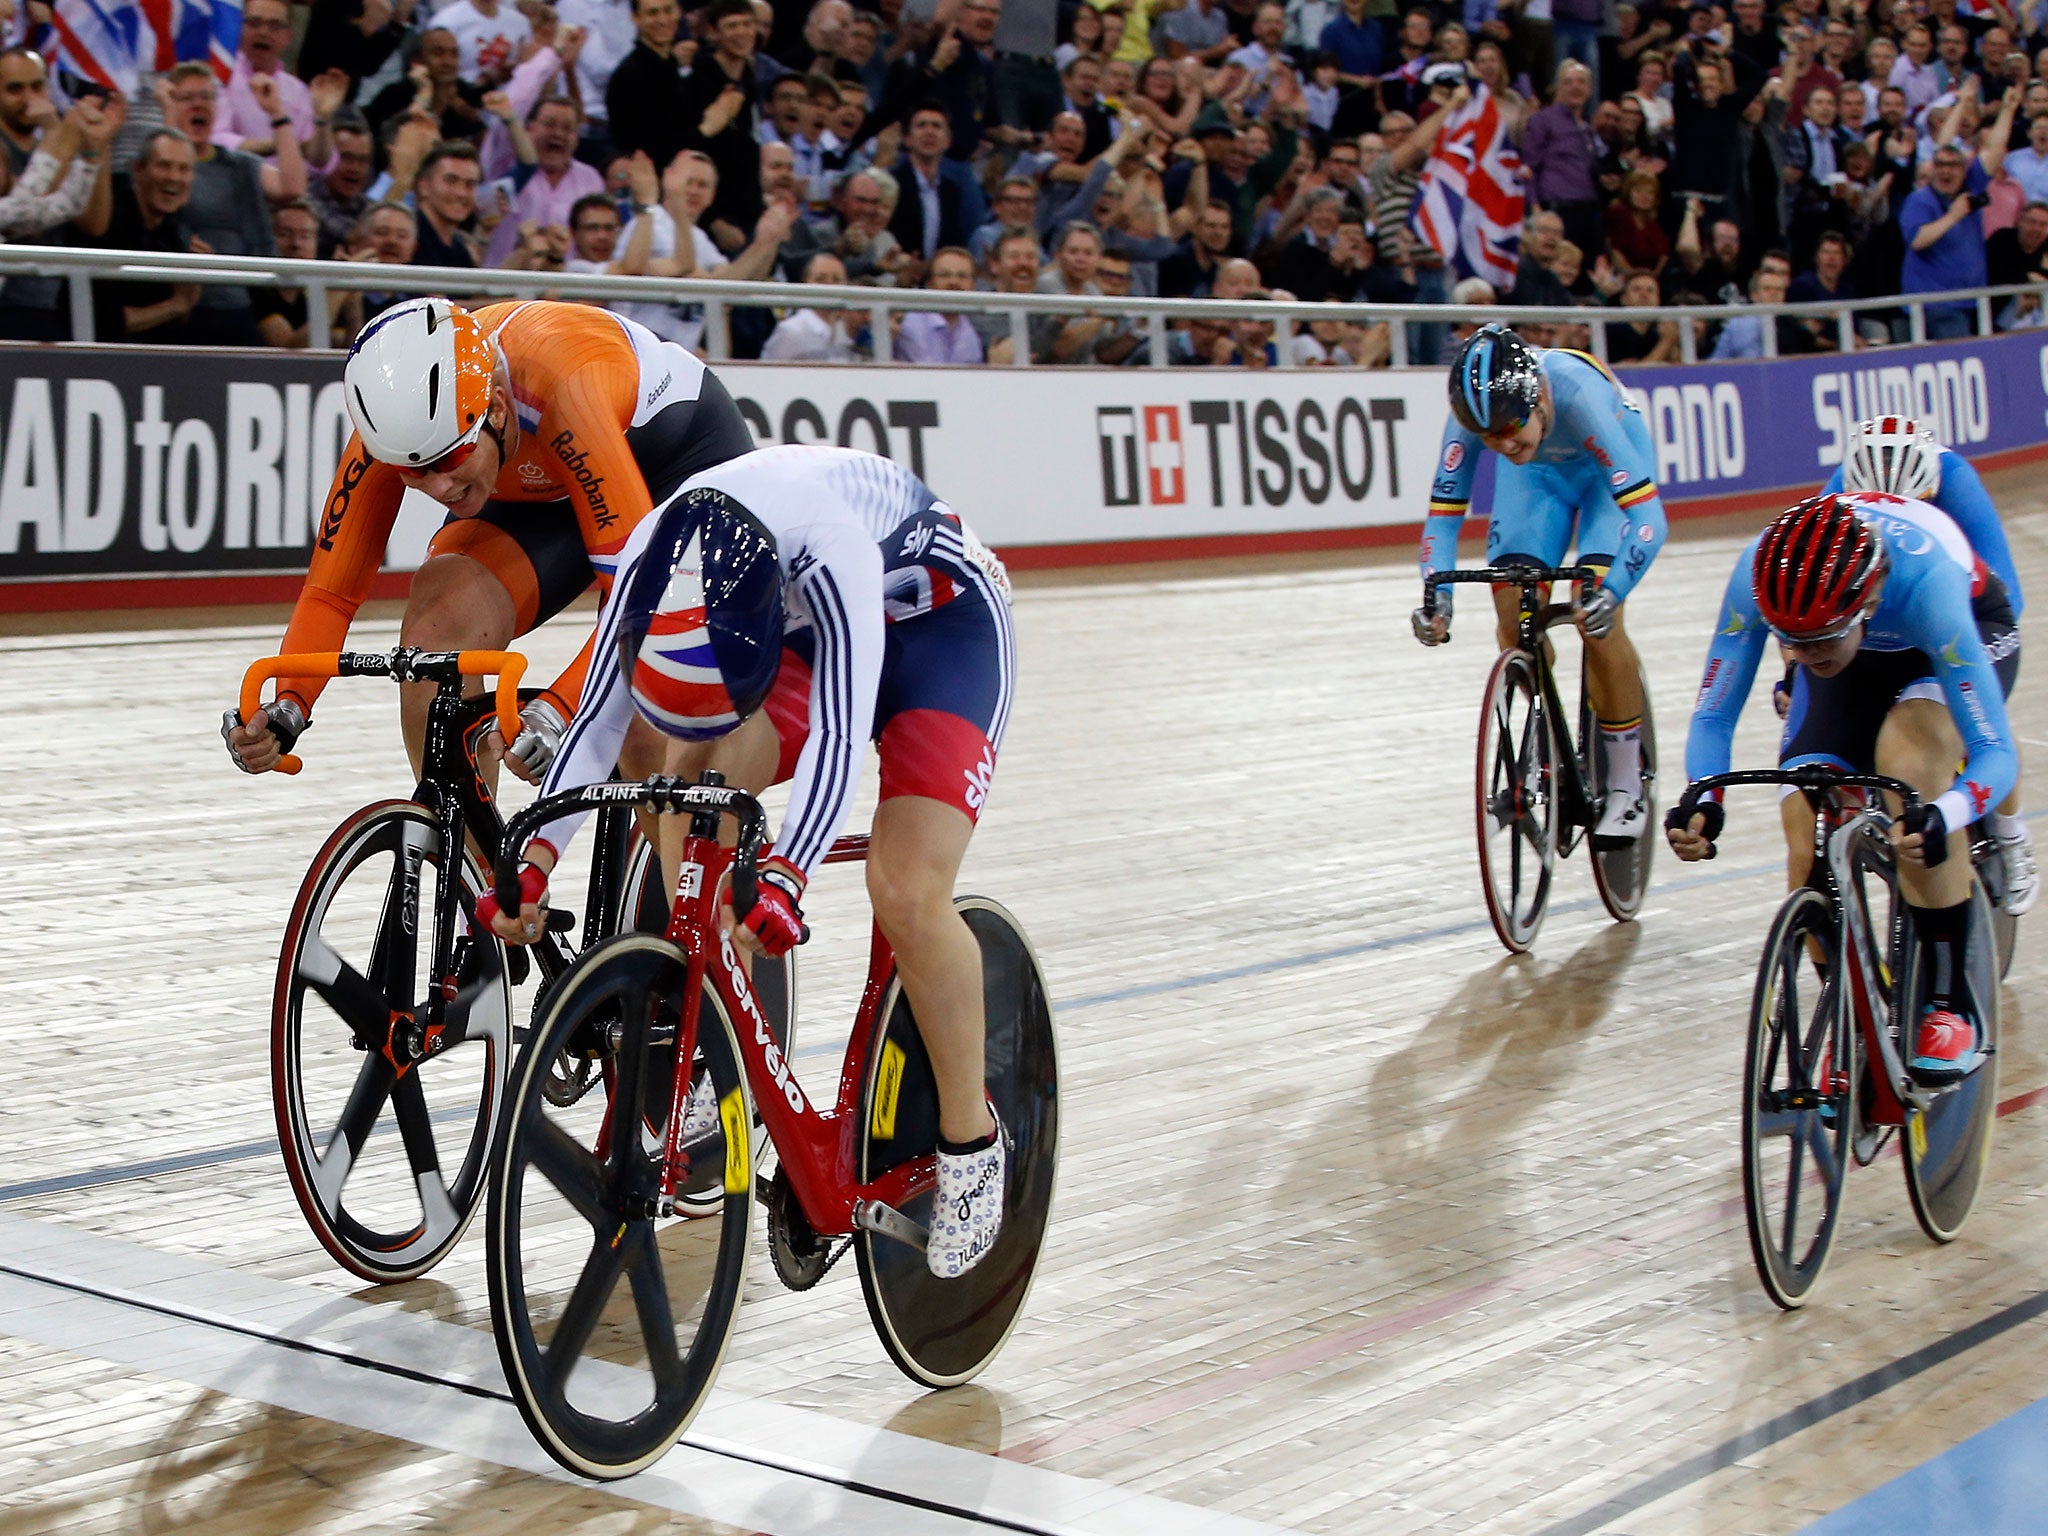 Laura Trott crosses the finish line to win the women’s 10km scratch final at the Track Cycling World Championships at Lee Valley VeloPark, London